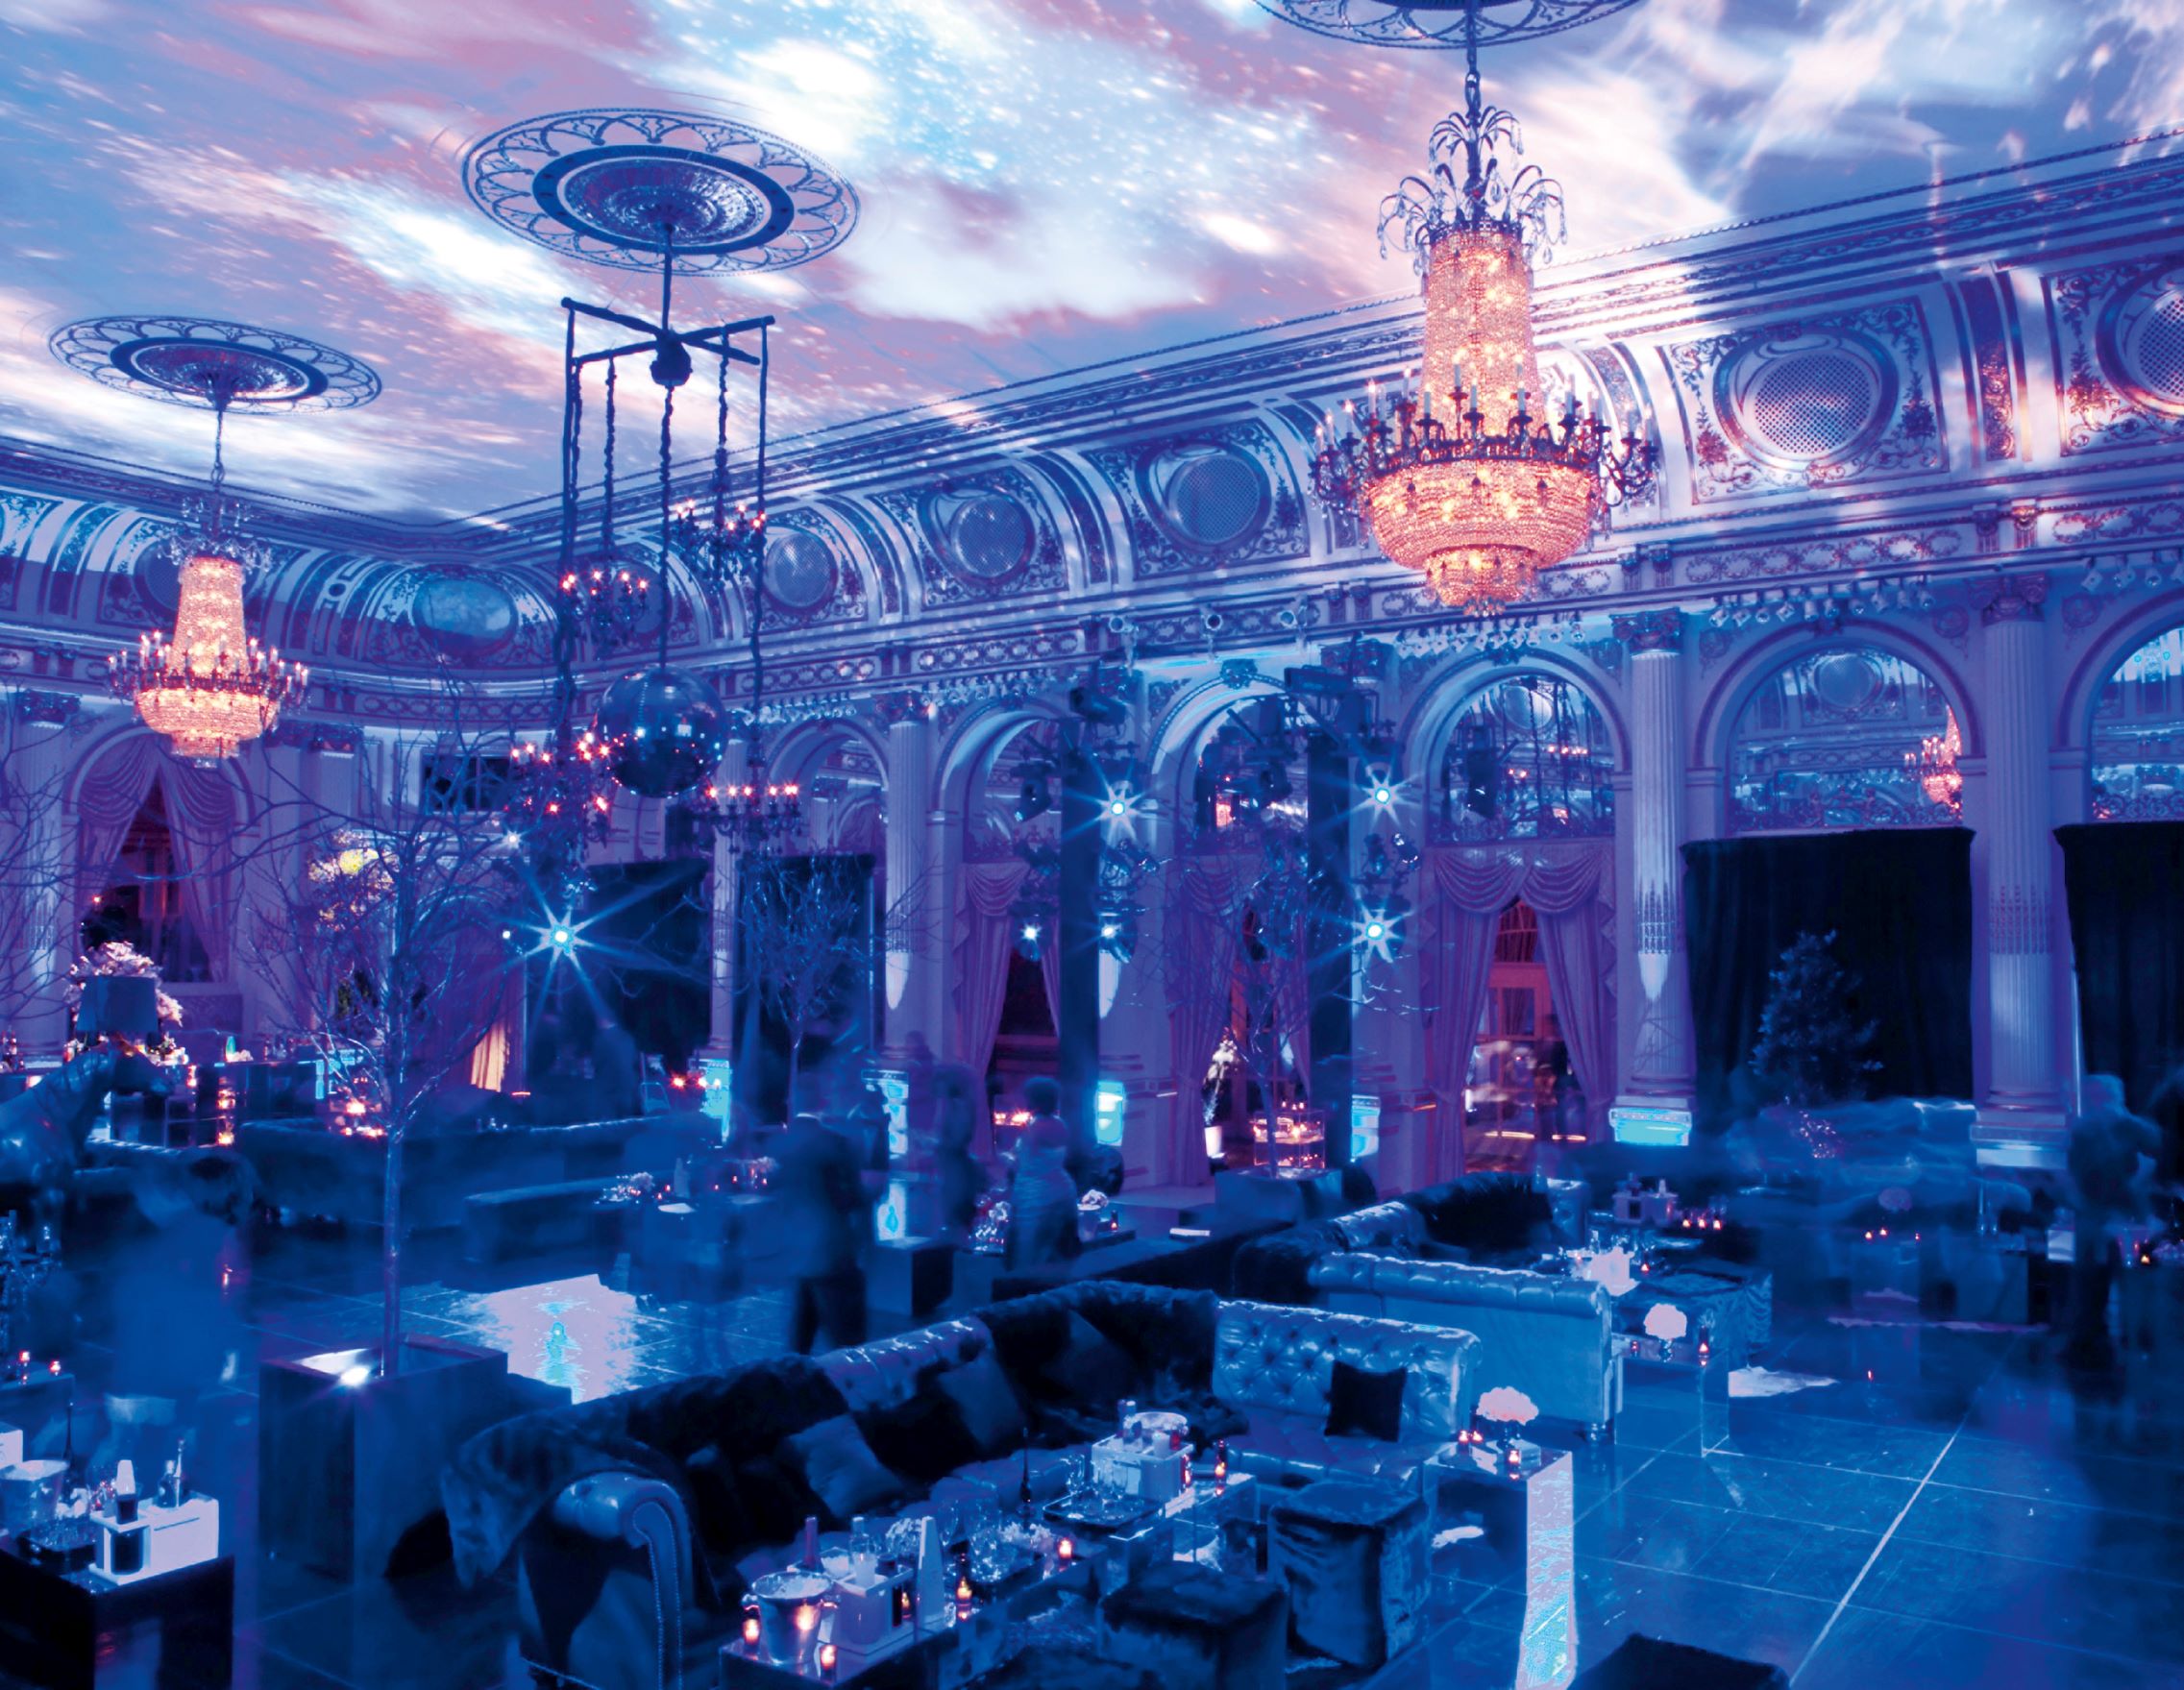 The Plaza Hotel’s Grand Ballroom set for Sean Combs’s birthday party. Image from Born to Party, Forced to Work